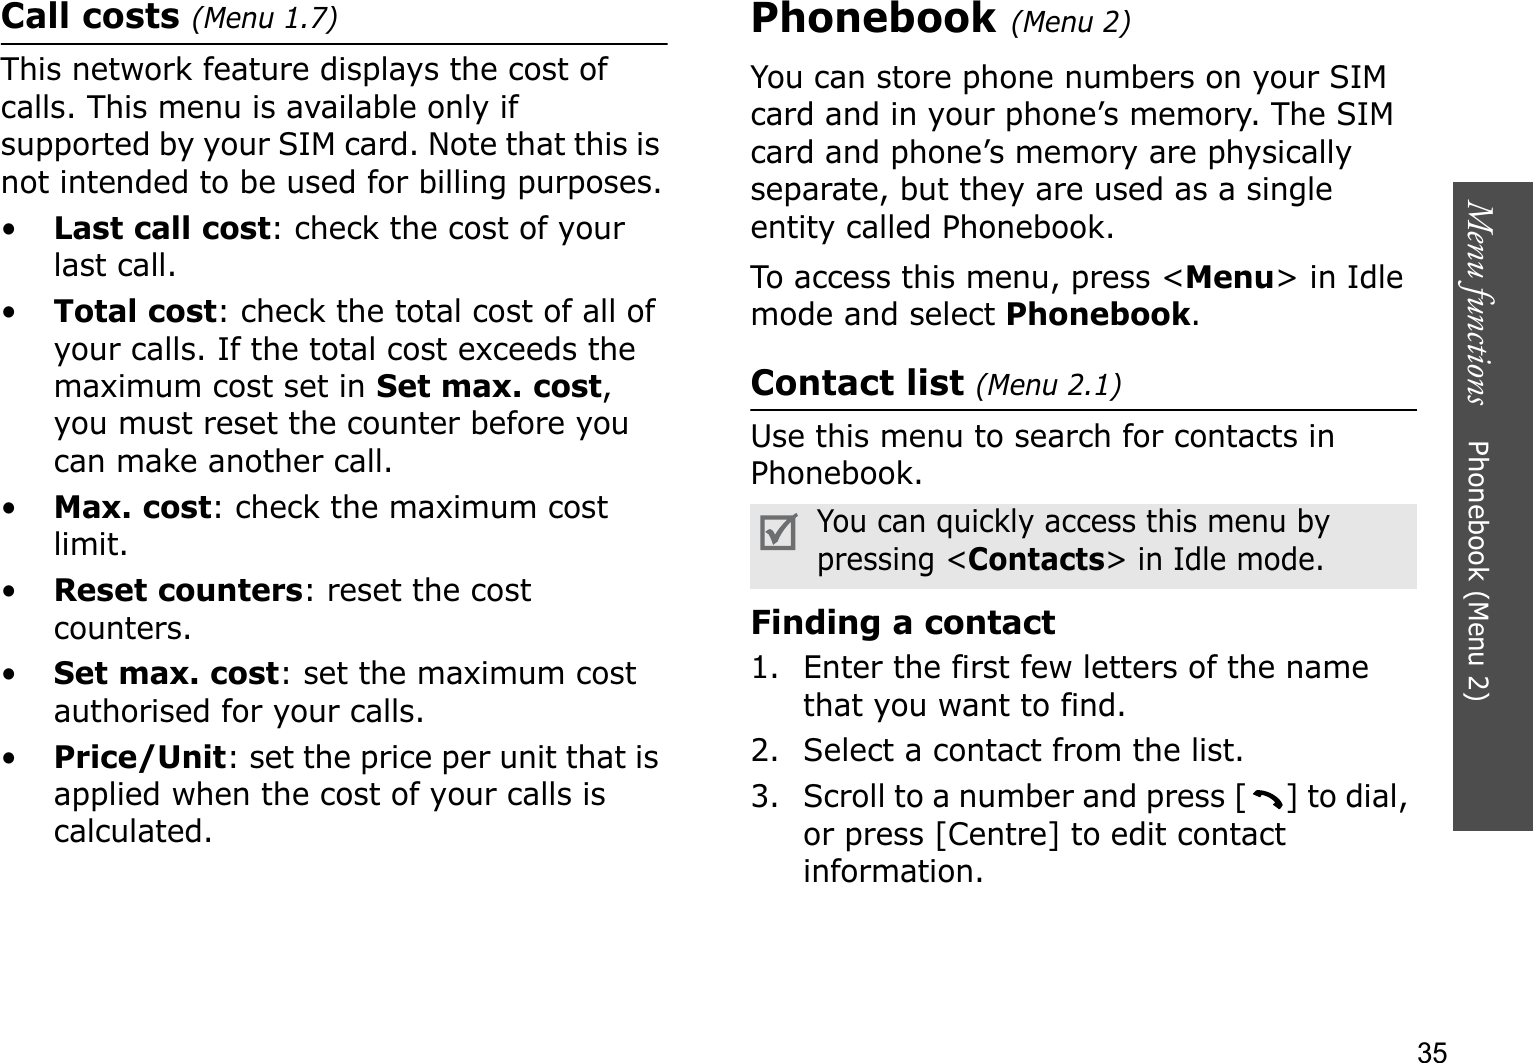 Menu functions    Phonebook (Menu 2)35Call costs (Menu 1.7)This network feature displays the cost of calls. This menu is available only if supported by your SIM card. Note that this is not intended to be used for billing purposes.•Last call cost: check the cost of your last call.•Total cost: check the total cost of all of your calls. If the total cost exceeds the maximum cost set in Set max. cost,you must reset the counter before you can make another call.•Max. cost: check the maximum cost limit.•Reset counters: reset the cost counters.•Set max. cost: set the maximum cost authorised for your calls.•Price/Unit: set the price per unit that is applied when the cost of your calls is calculated.Phonebook (Menu 2)You can store phone numbers on your SIM card and in your phone’s memory. The SIM card and phone’s memory are physically separate, but they are used as a single entity called Phonebook.To access this menu, press &lt;Menu&gt; in Idle mode and select Phonebook.Contact list (Menu 2.1)Use this menu to search for contacts in Phonebook.Finding a contact1. Enter the first few letters of the name that you want to find.2. Select a contact from the list.3. Scroll to a number and press [ ] to dial, or press [Centre] to edit contact information.You can quickly access this menu by pressing &lt;Contacts&gt; in Idle mode.